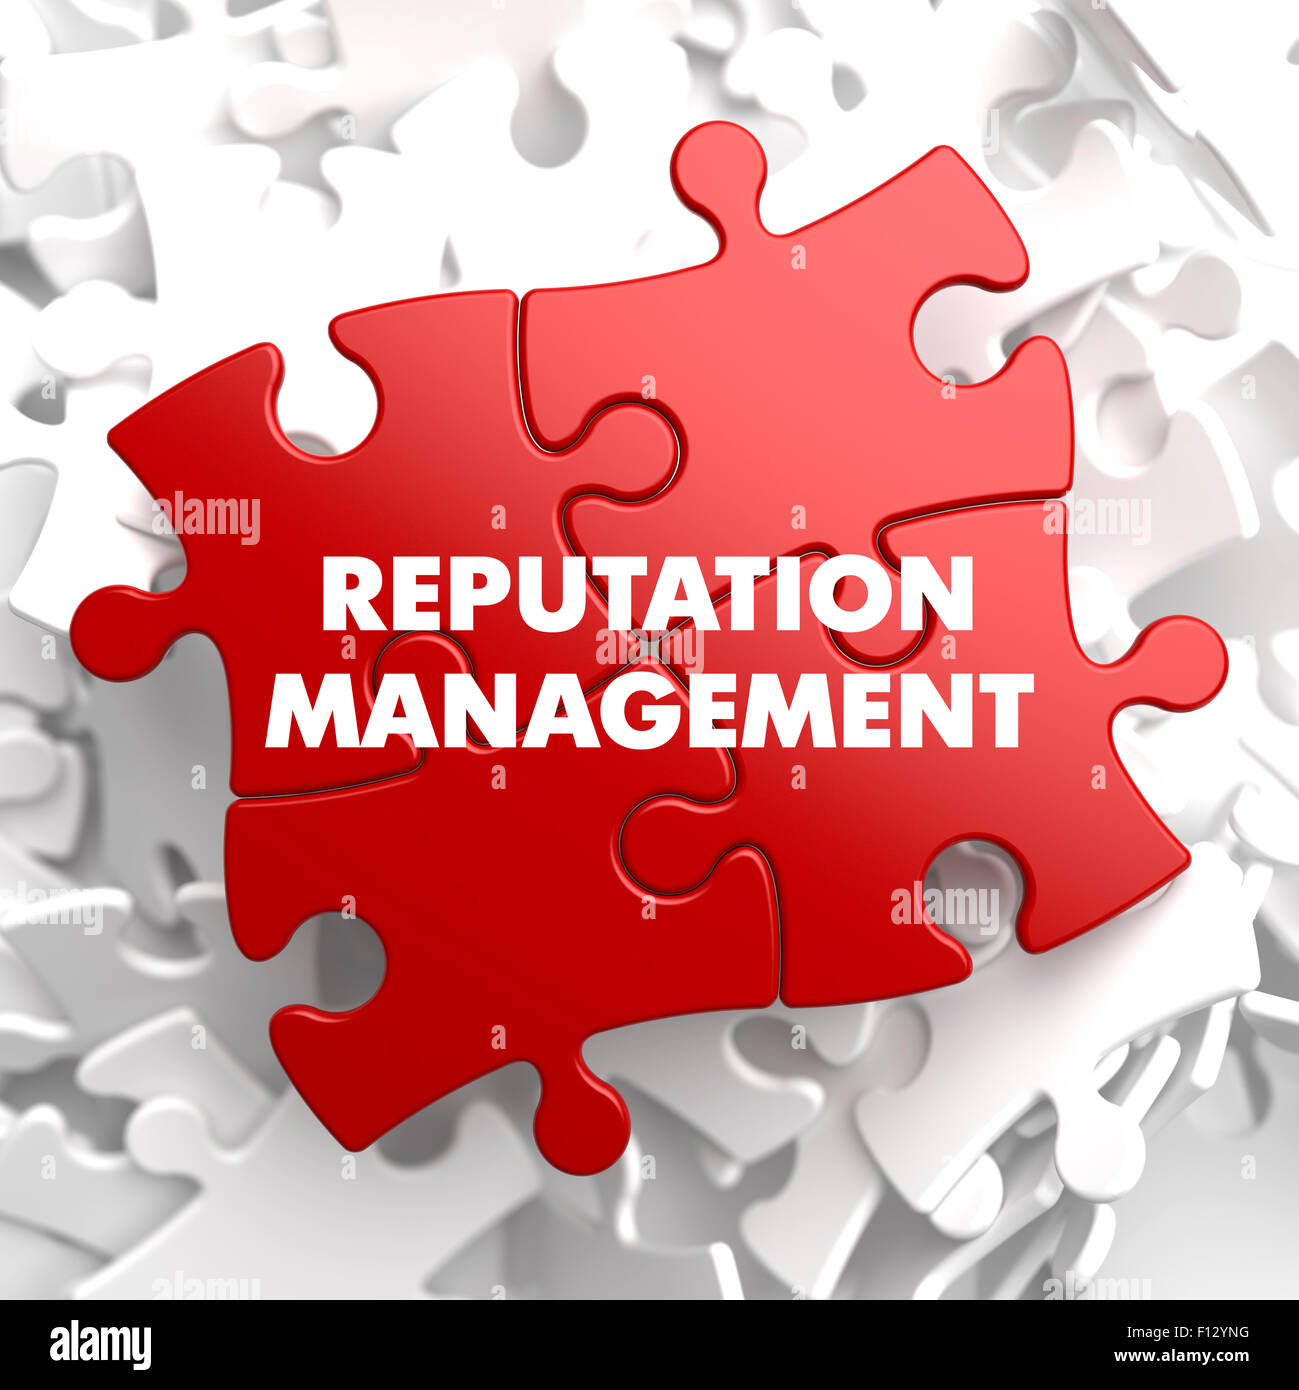 Reputation Management on Red Puzzle. Stock Photo